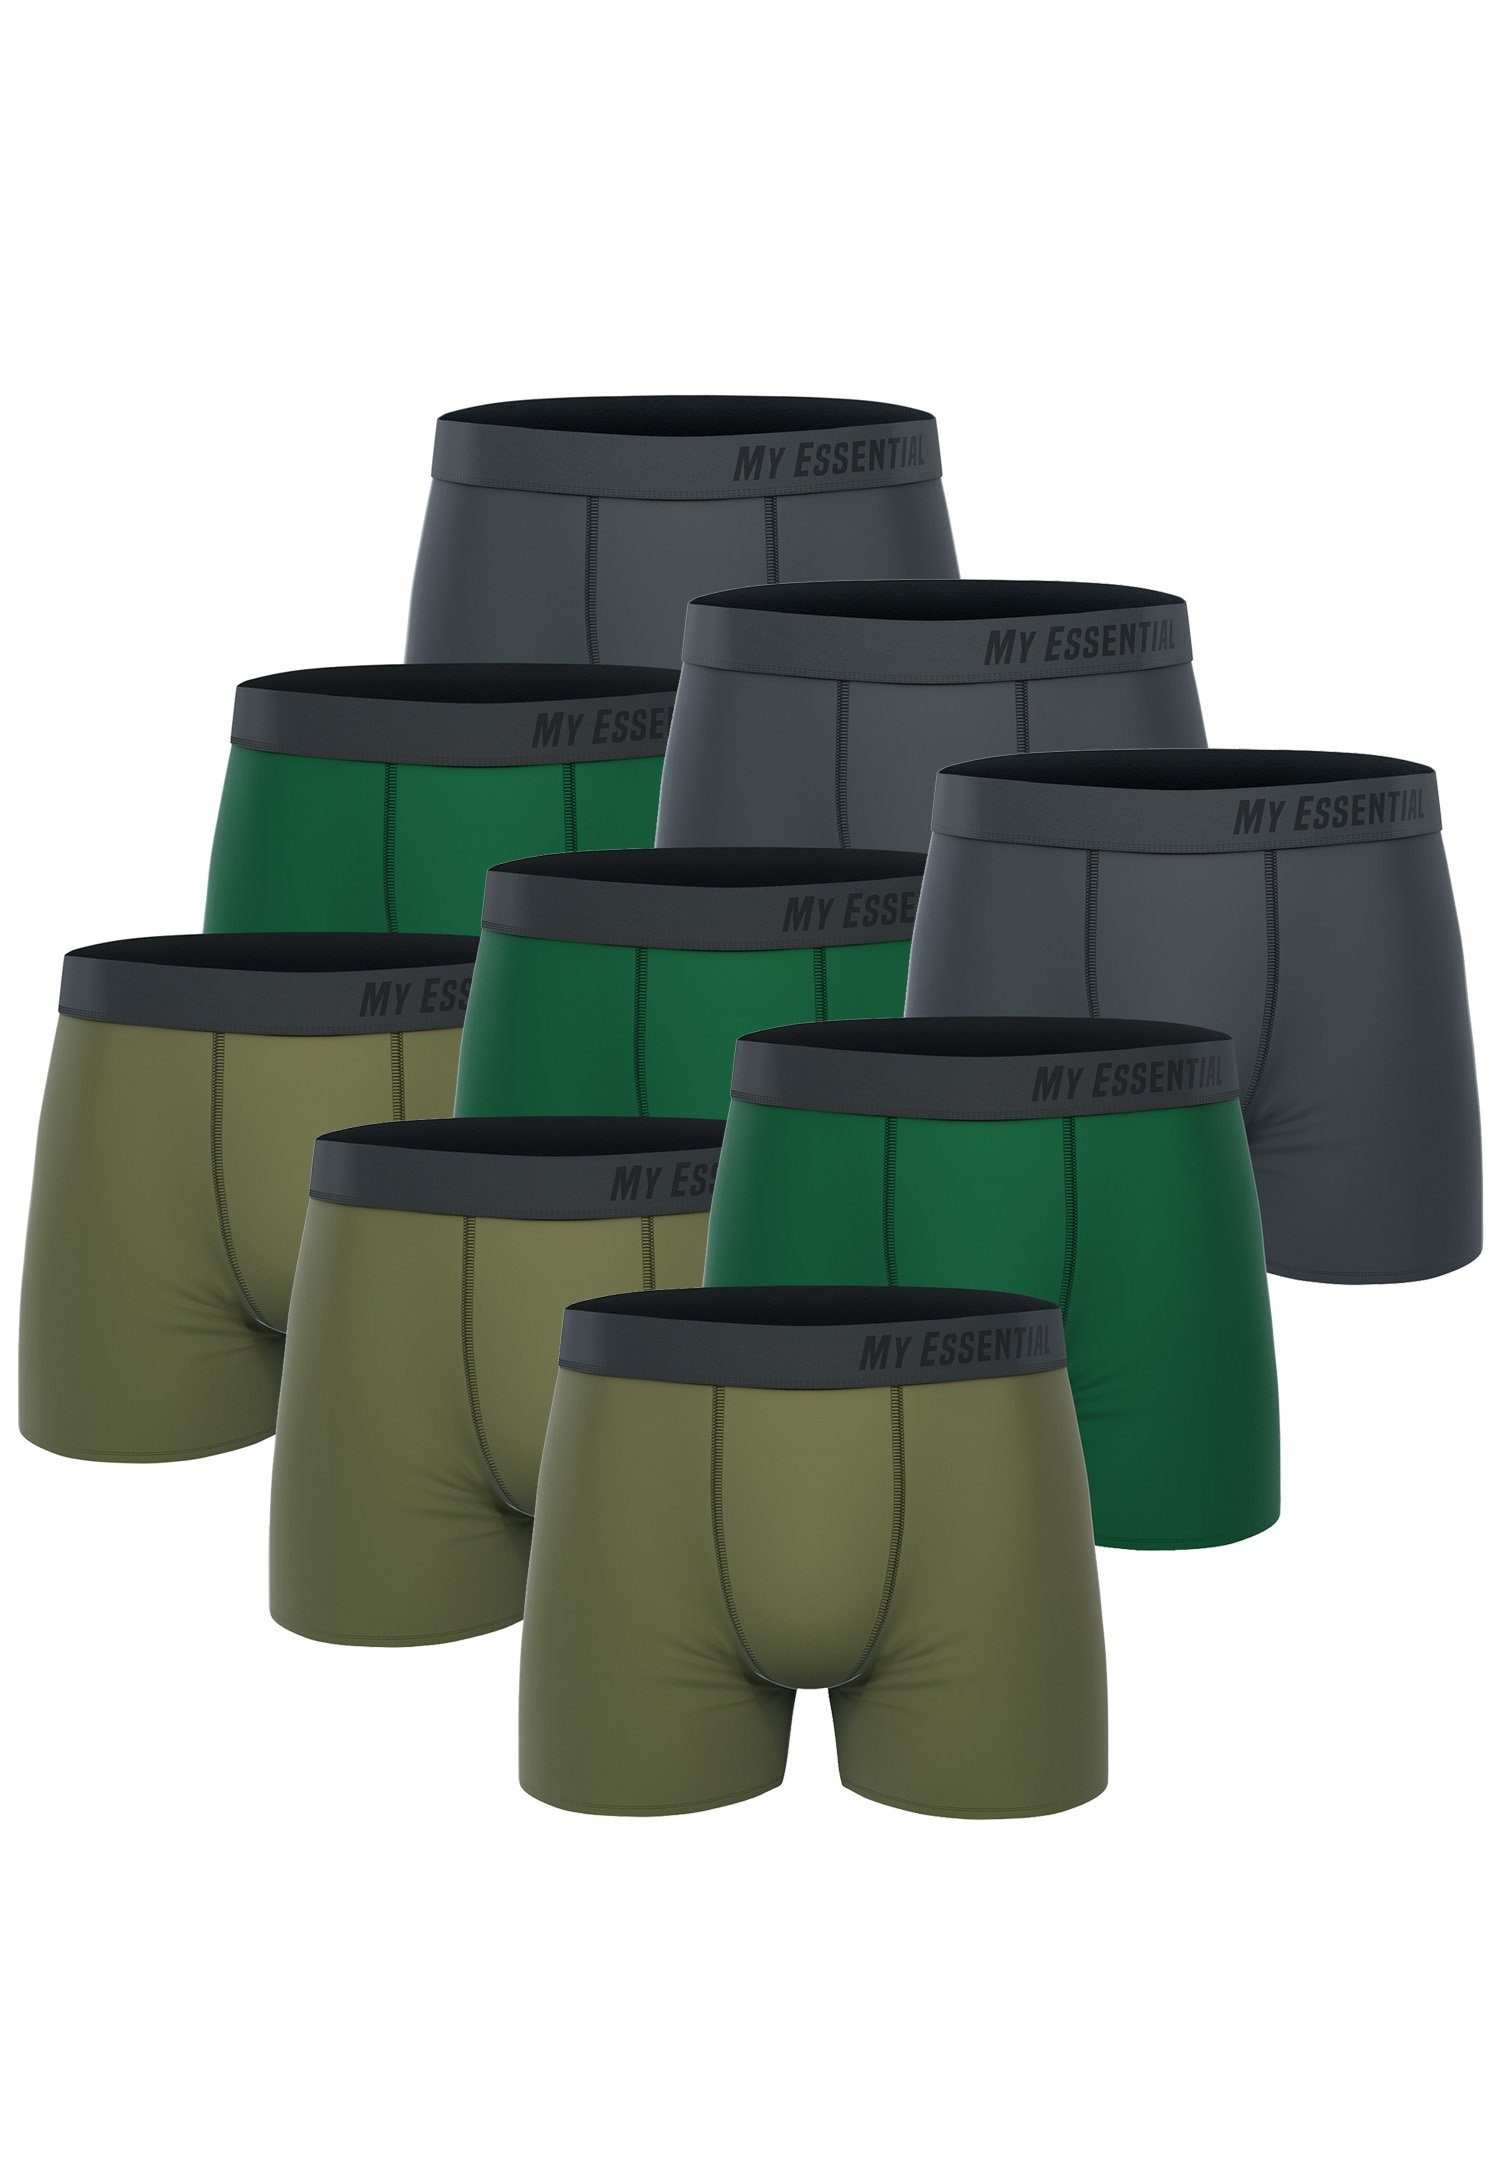 My Essential Clothing Boxershorts My Cotton Green Boxers Essential (Spar-Pack, Bio 9er-Pack) Pack 9-St., 9